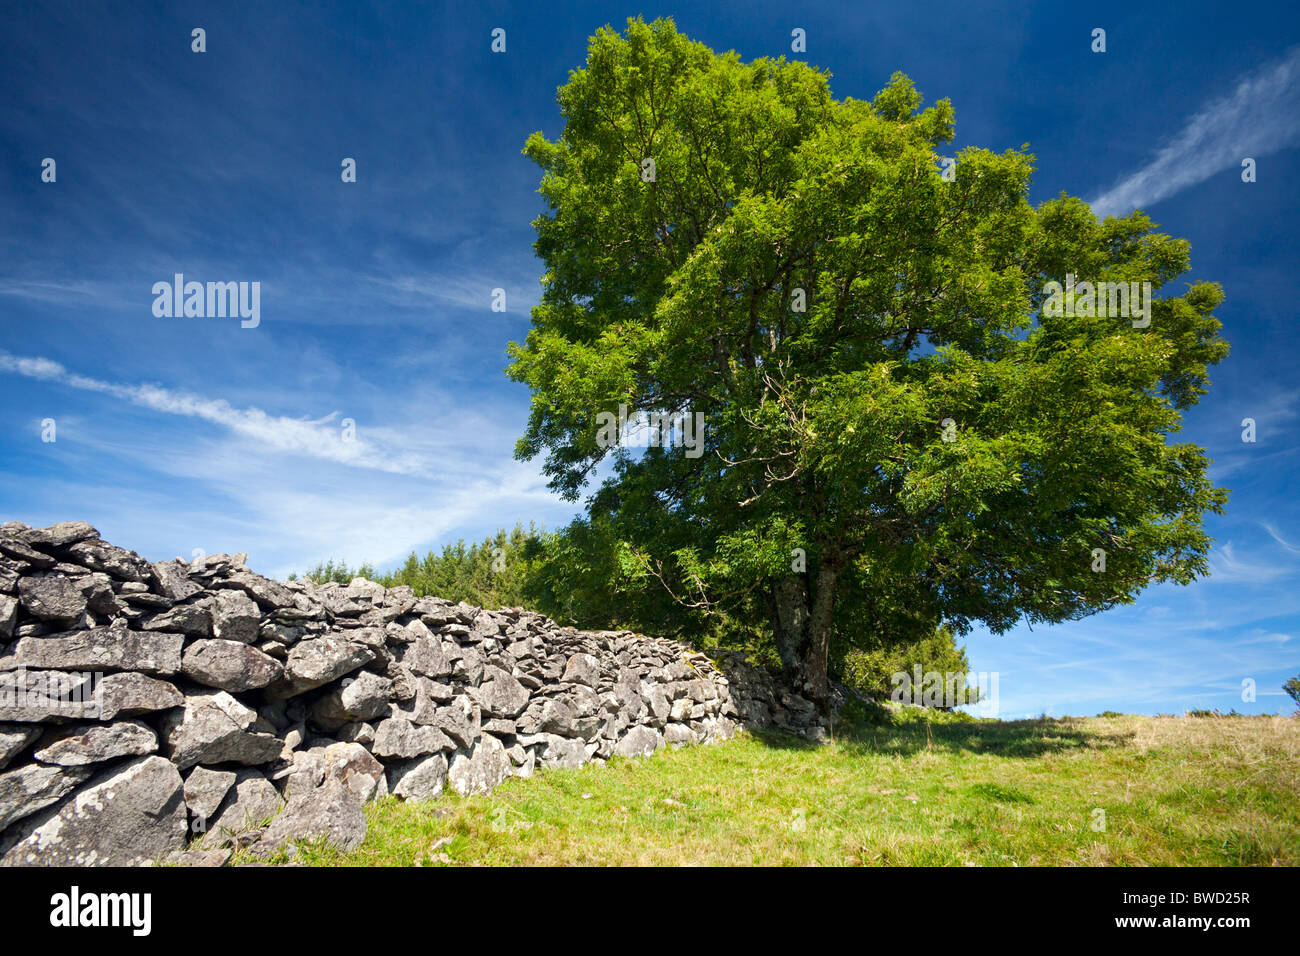 In Summer, a common ash tree in front of a dry-stone wall (Auvergne - France). Frêne devant un mur de pierres sèches (France). Stock Photo